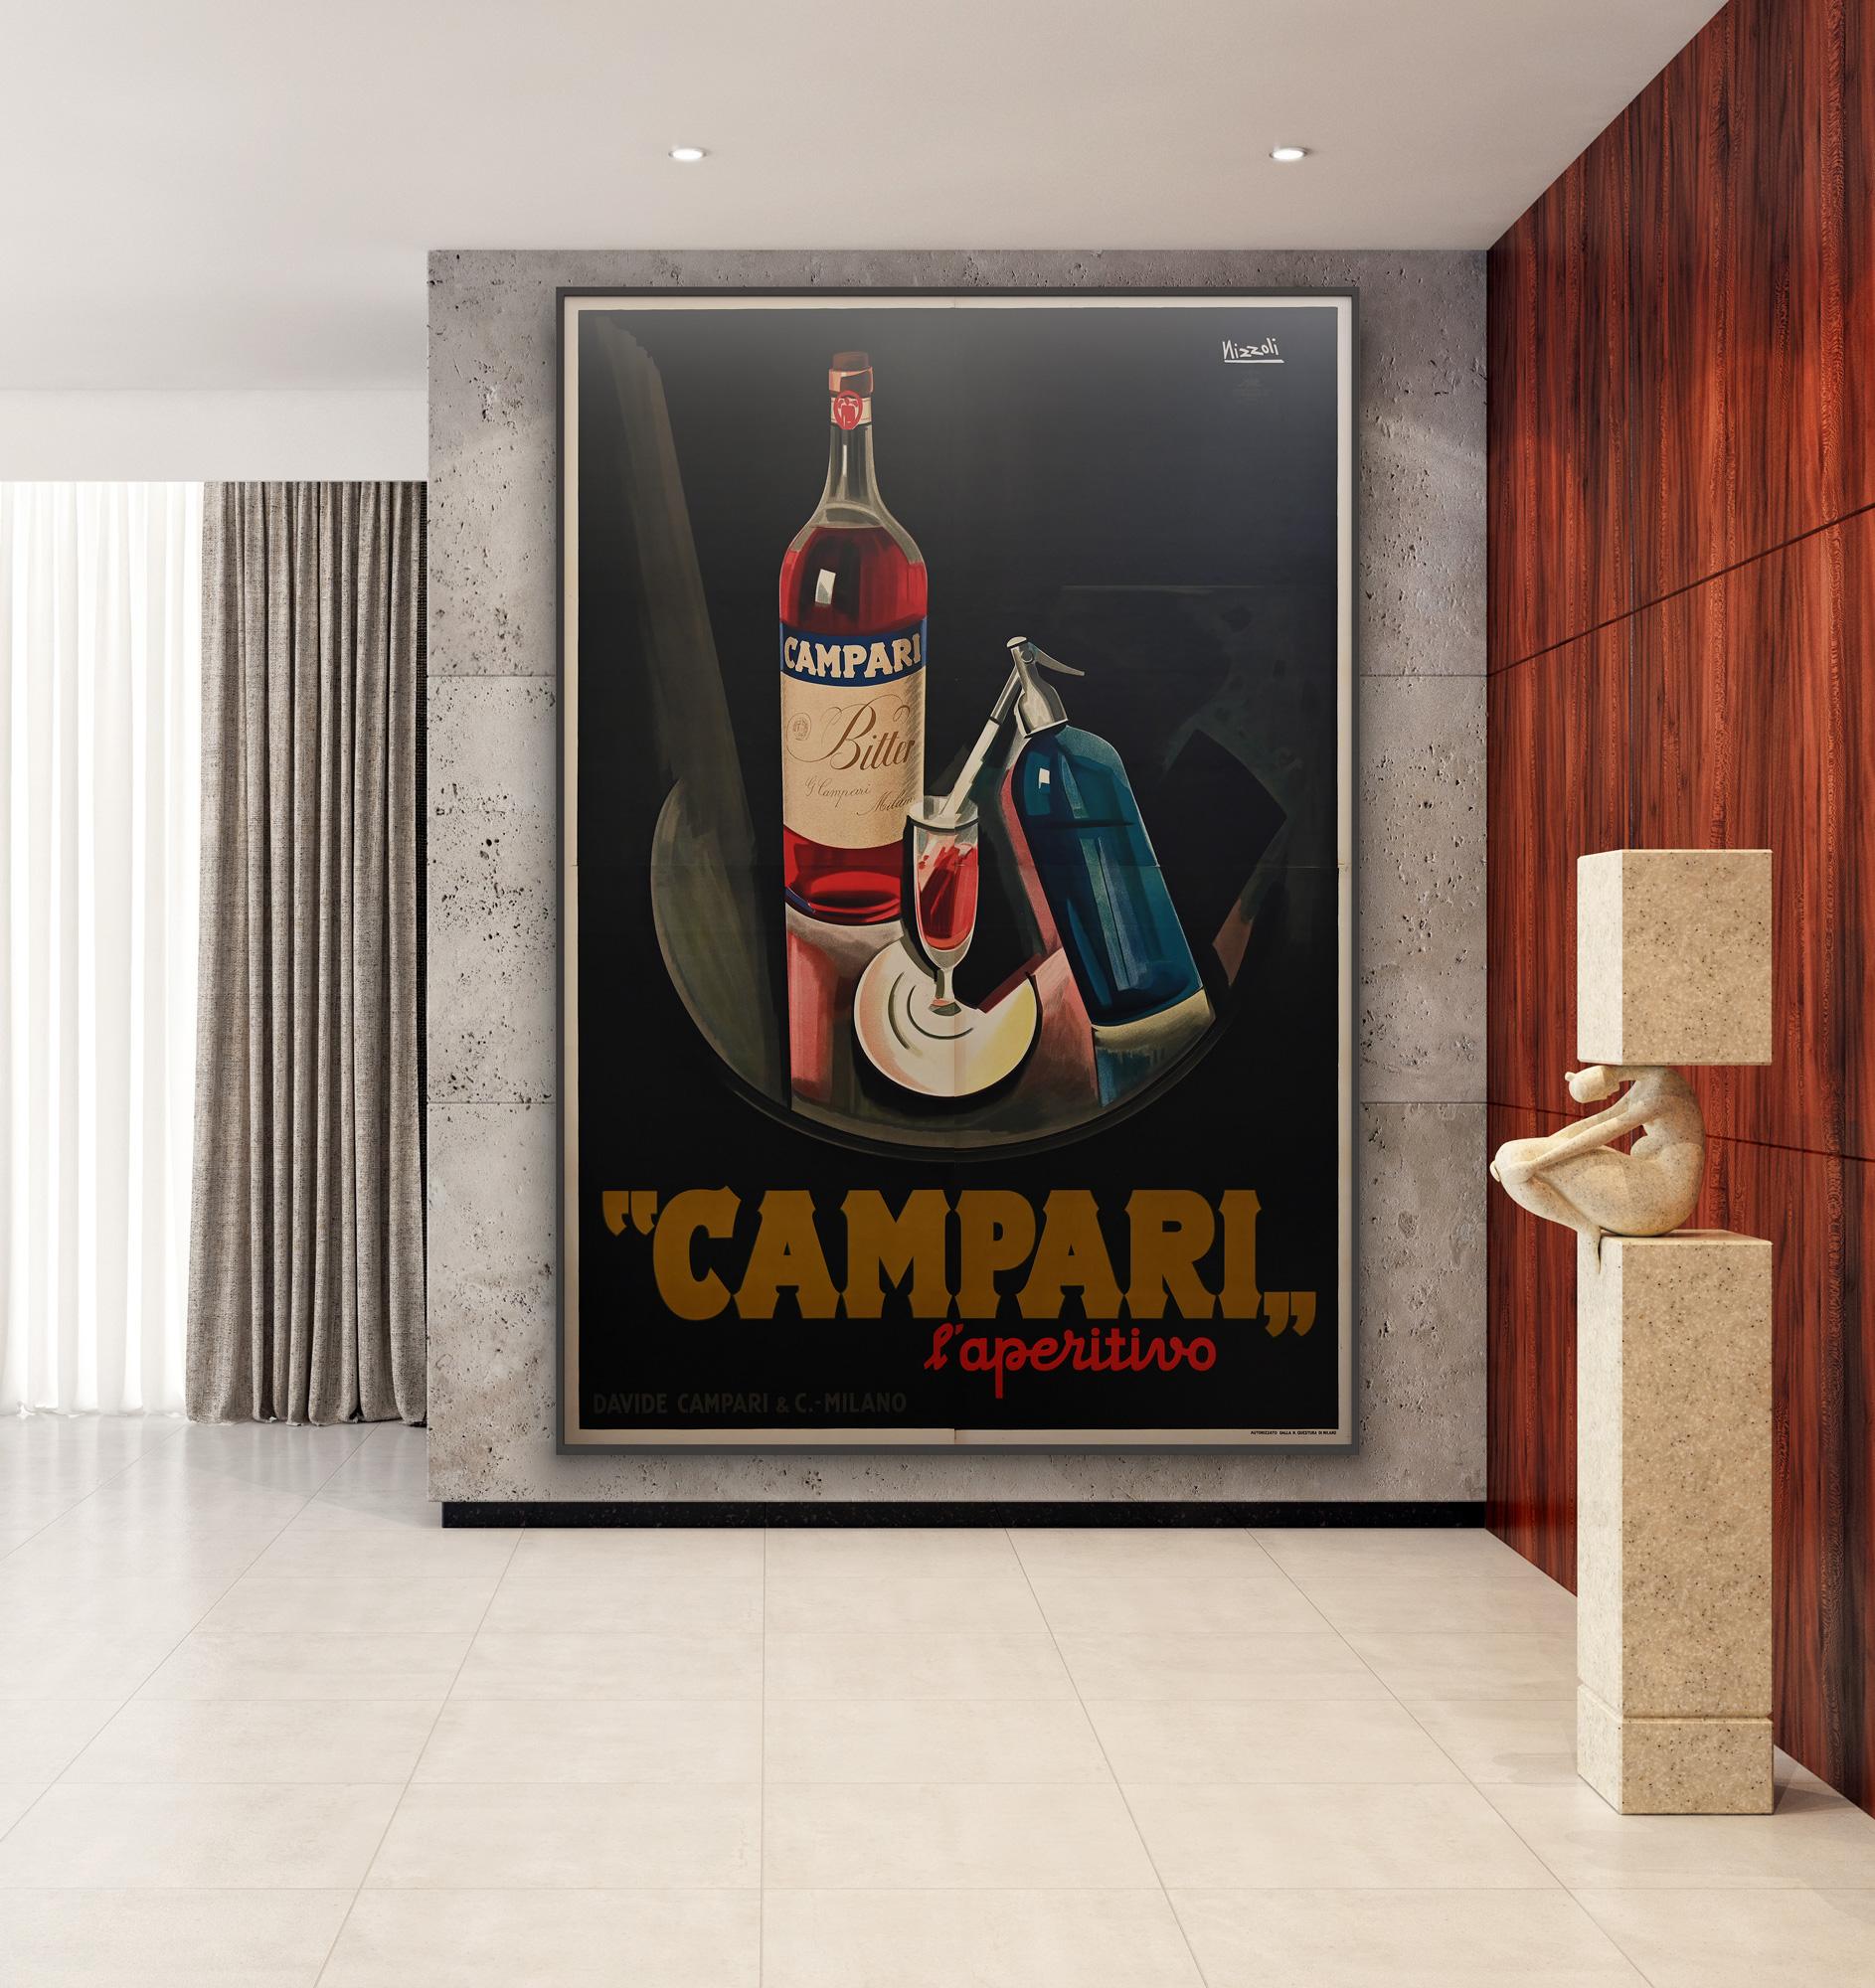 Fabulous supersized vintage Italian advertising poster from 1926 for Bitter Campari. We love the striking design by Marcello Nizzoli which delivers maximum impact on this huge poster, the largest version of the poster ever printed. Exceptionally